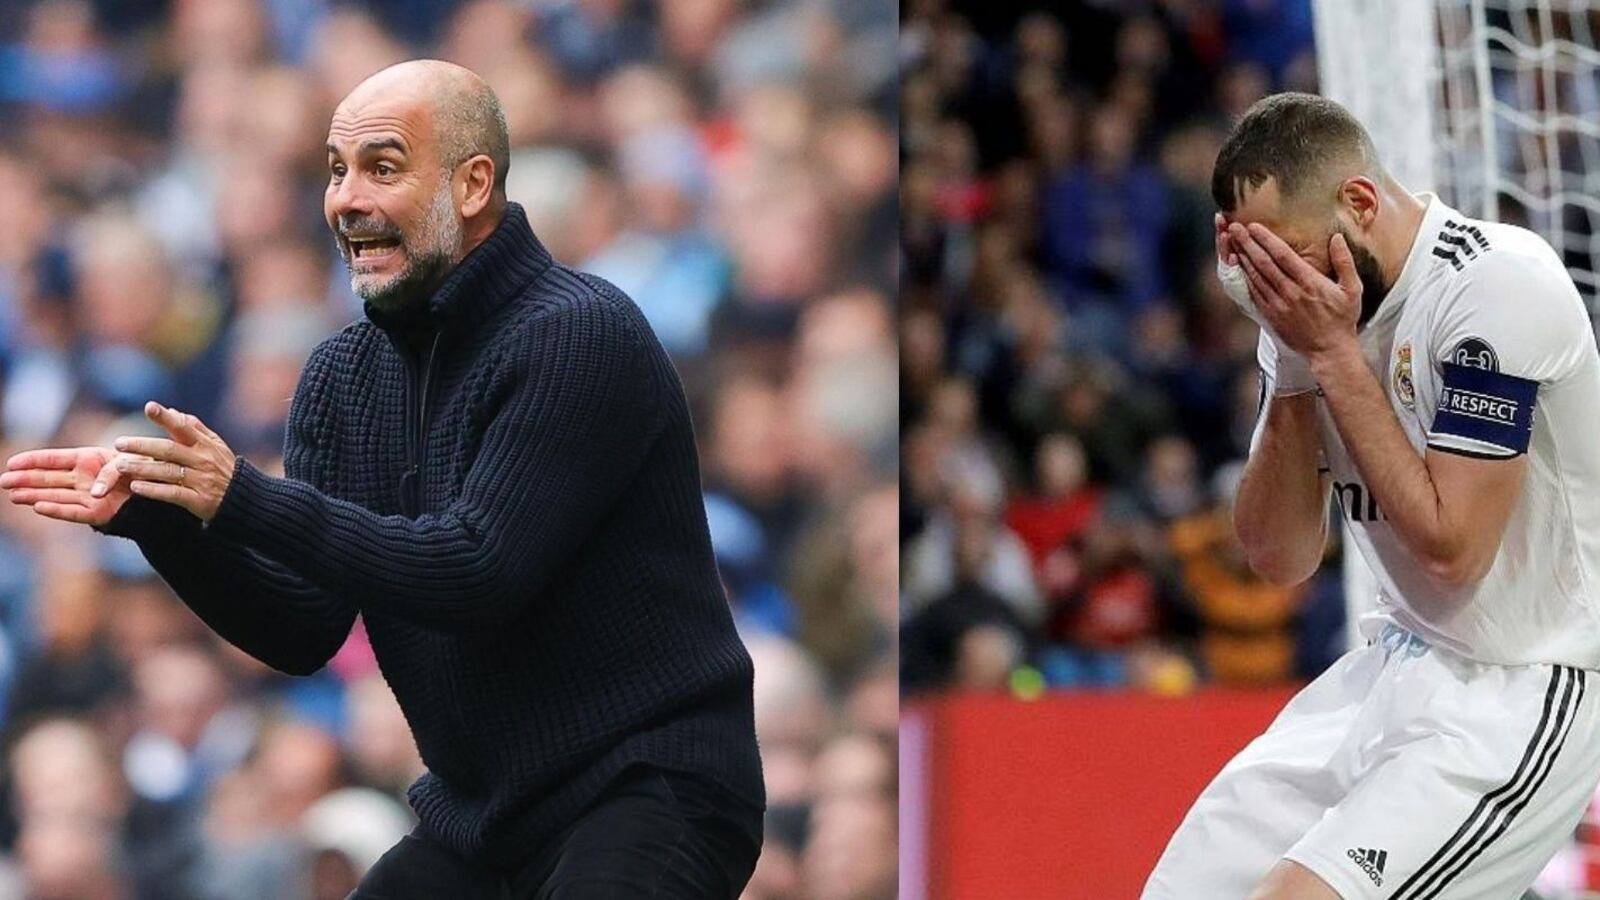 Welcome to Manchester City, Guardiola wishes a player who betrayed Real Madrid